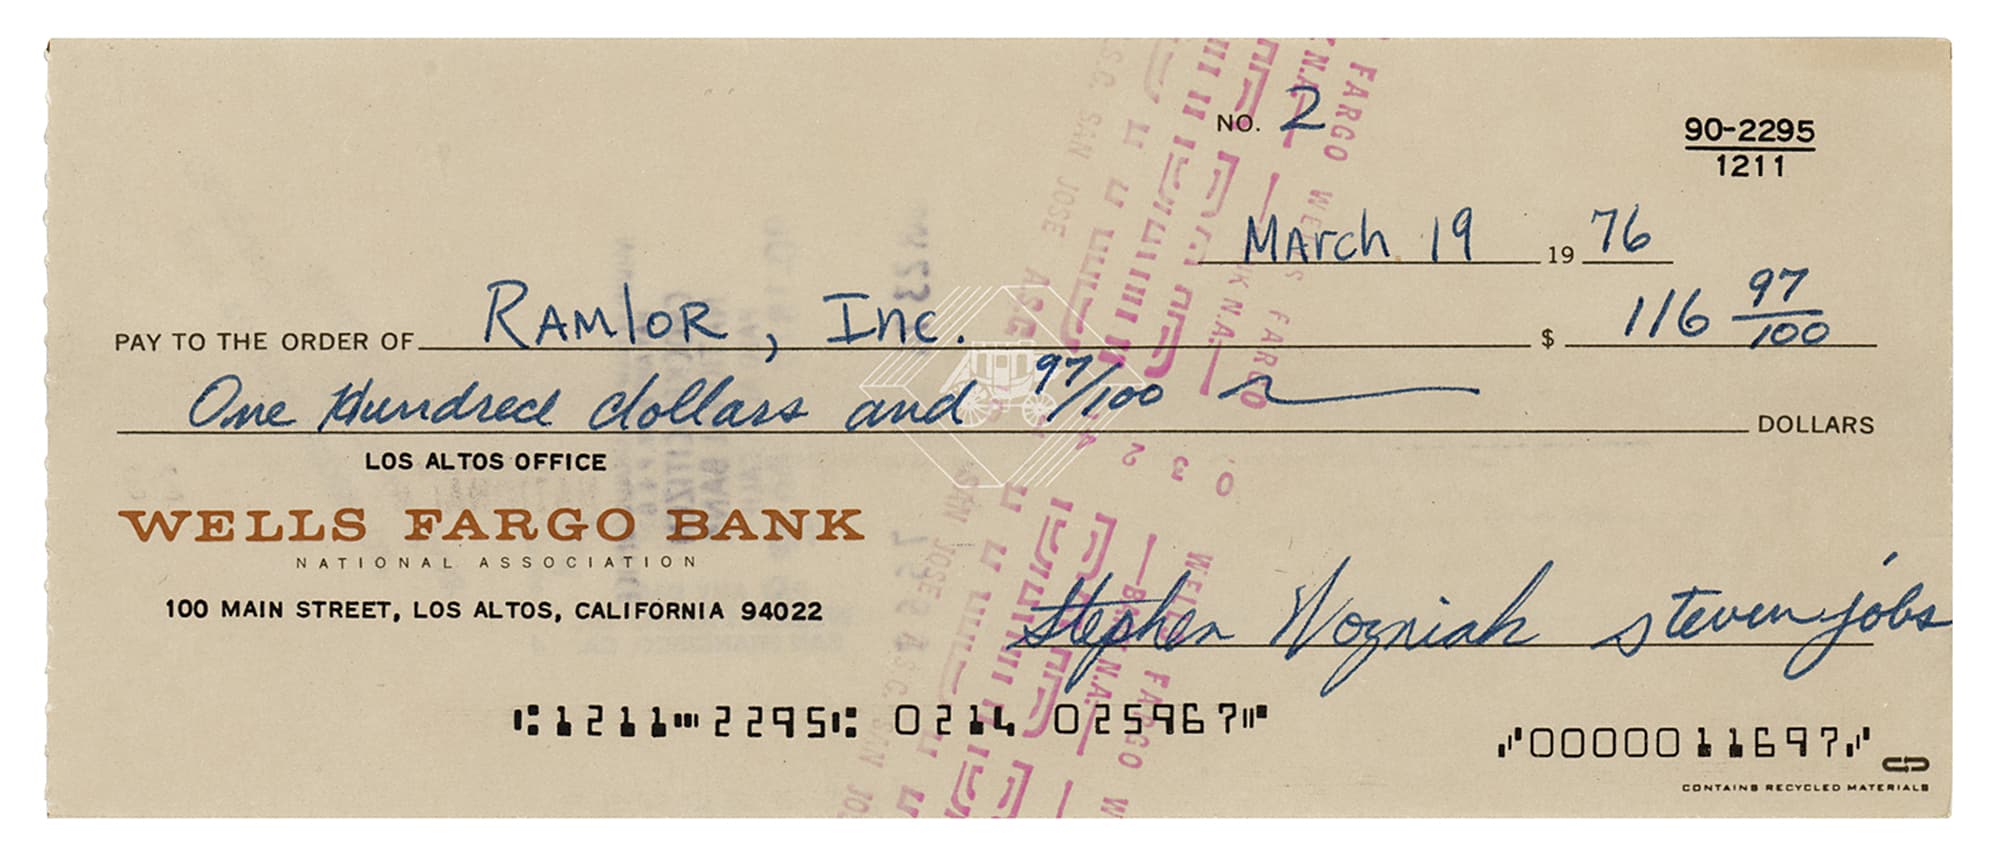 A check signed by Steve Jobs and Woz is selling for more than $135,000